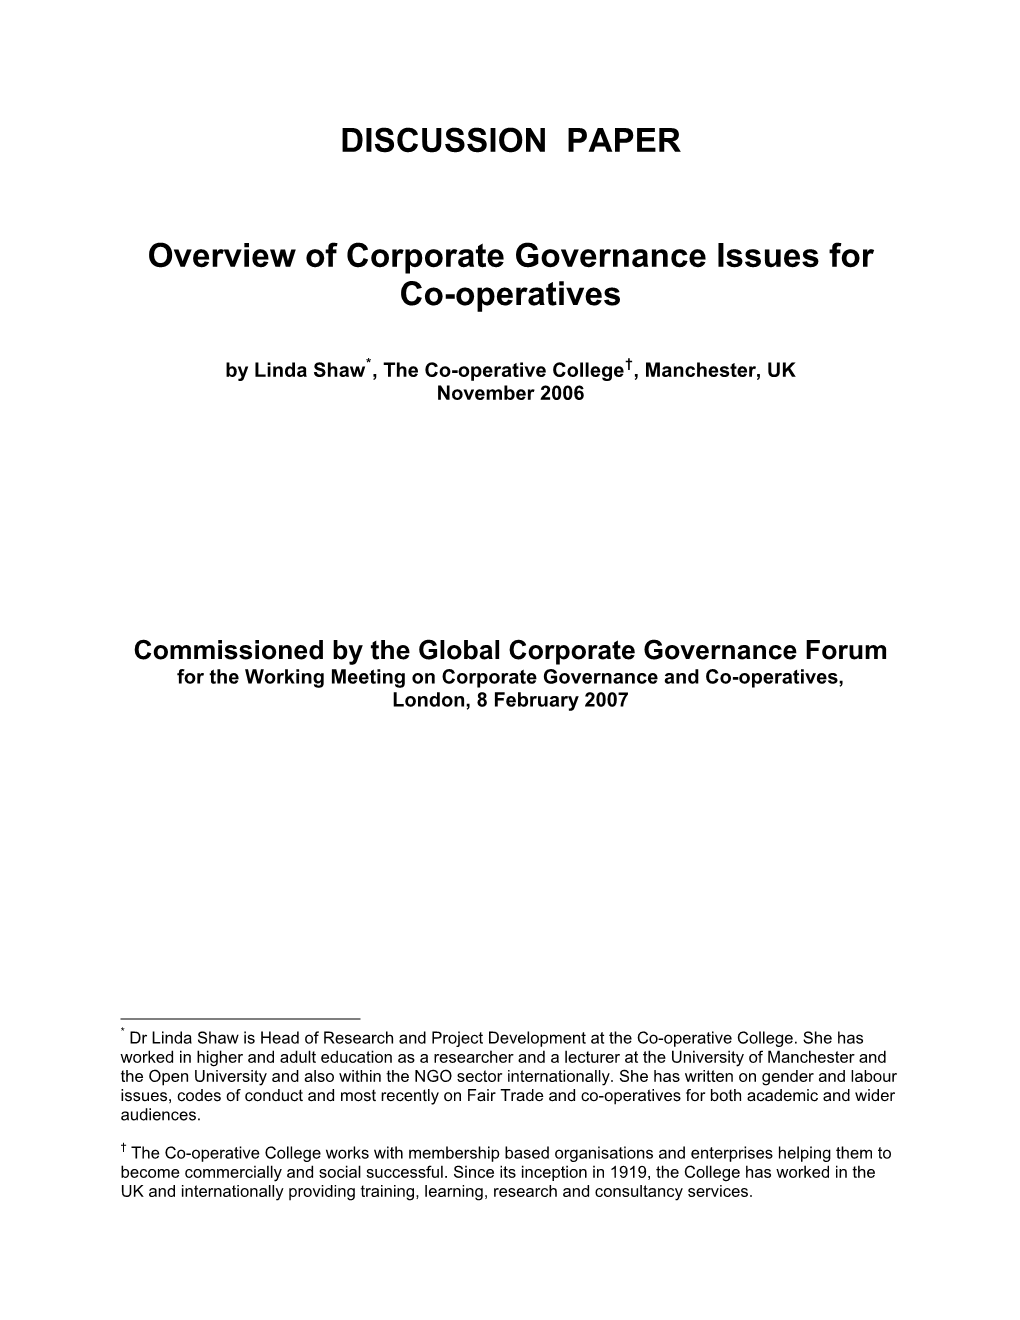 Overview of Corporate Governance Issues for Co-Operatives